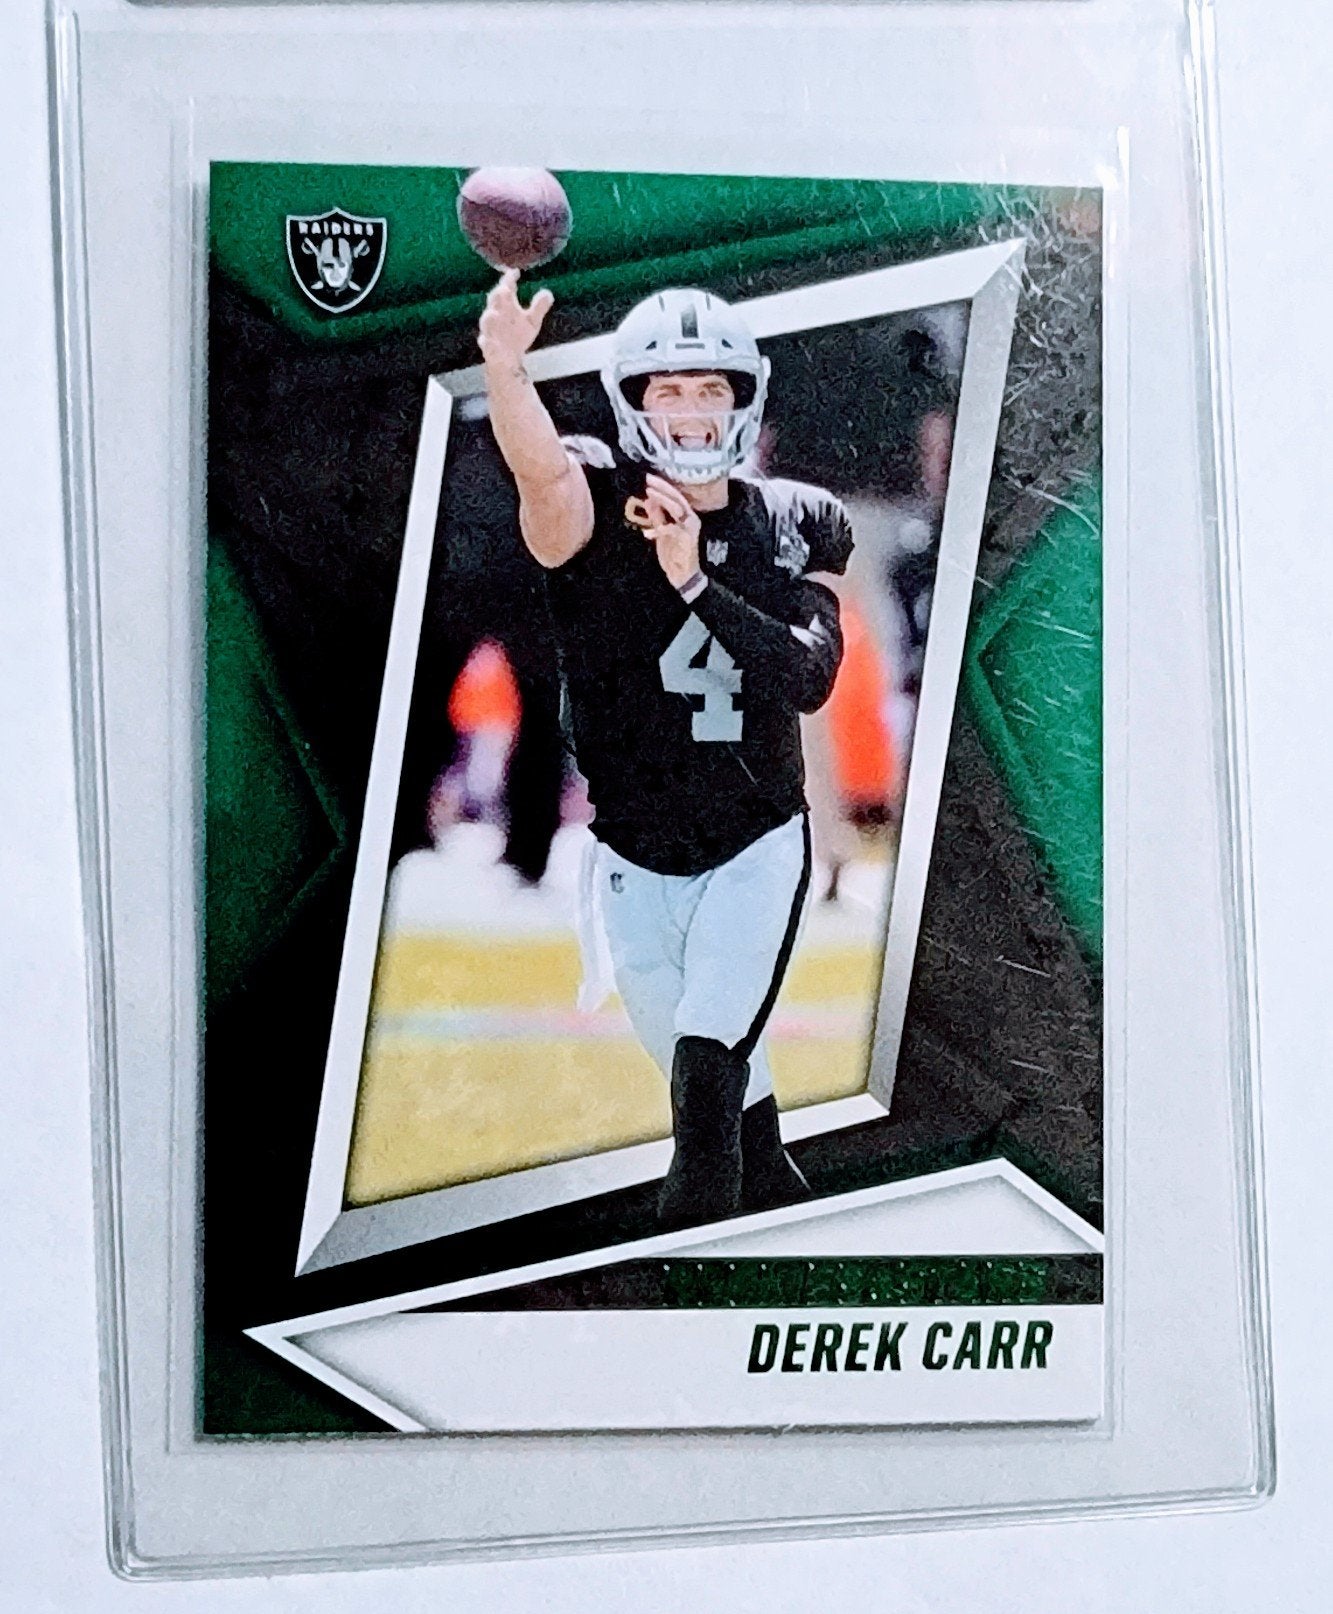 2021 Panini Rookies and Stars Derek Carr Green Football Card AVM1 simple Xclusive Collectibles   